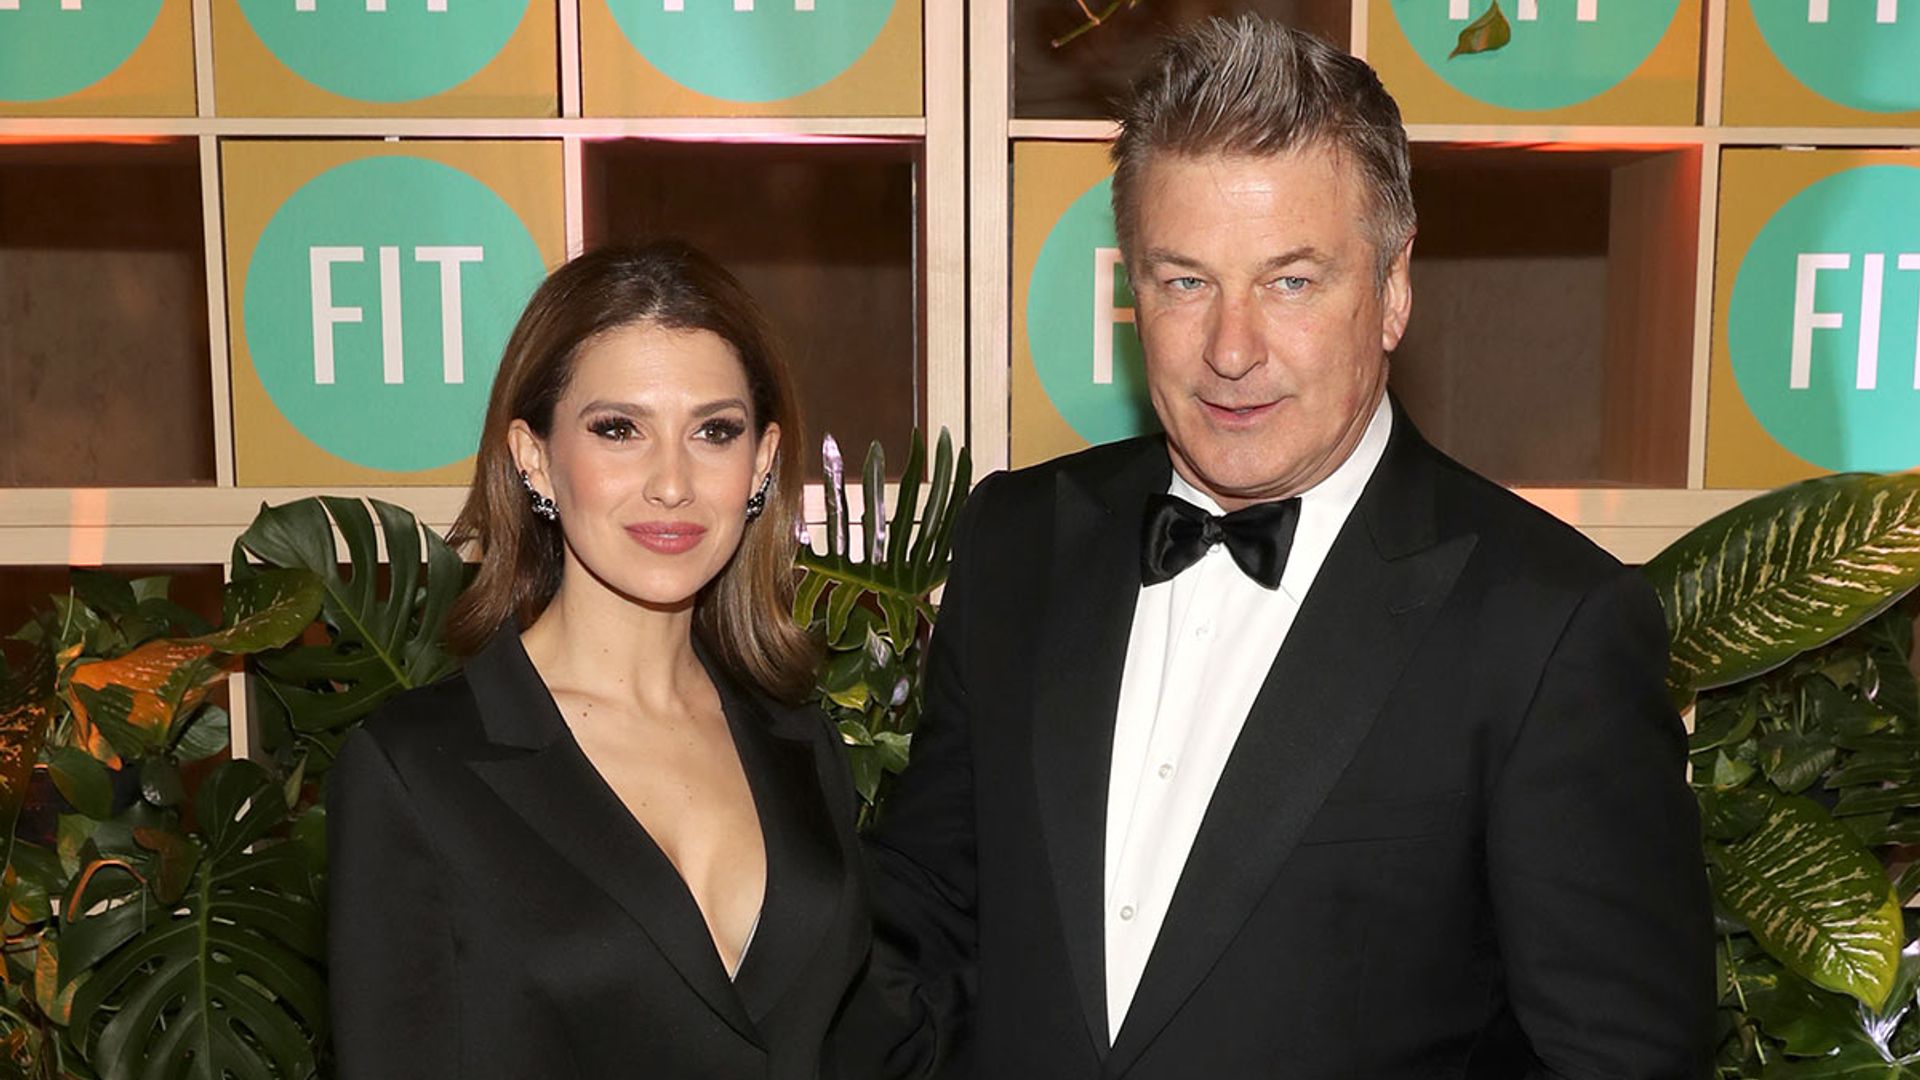 Alec Baldwin's wife Hilaria shares heartbreaking updates as she reveals likely miscarriage